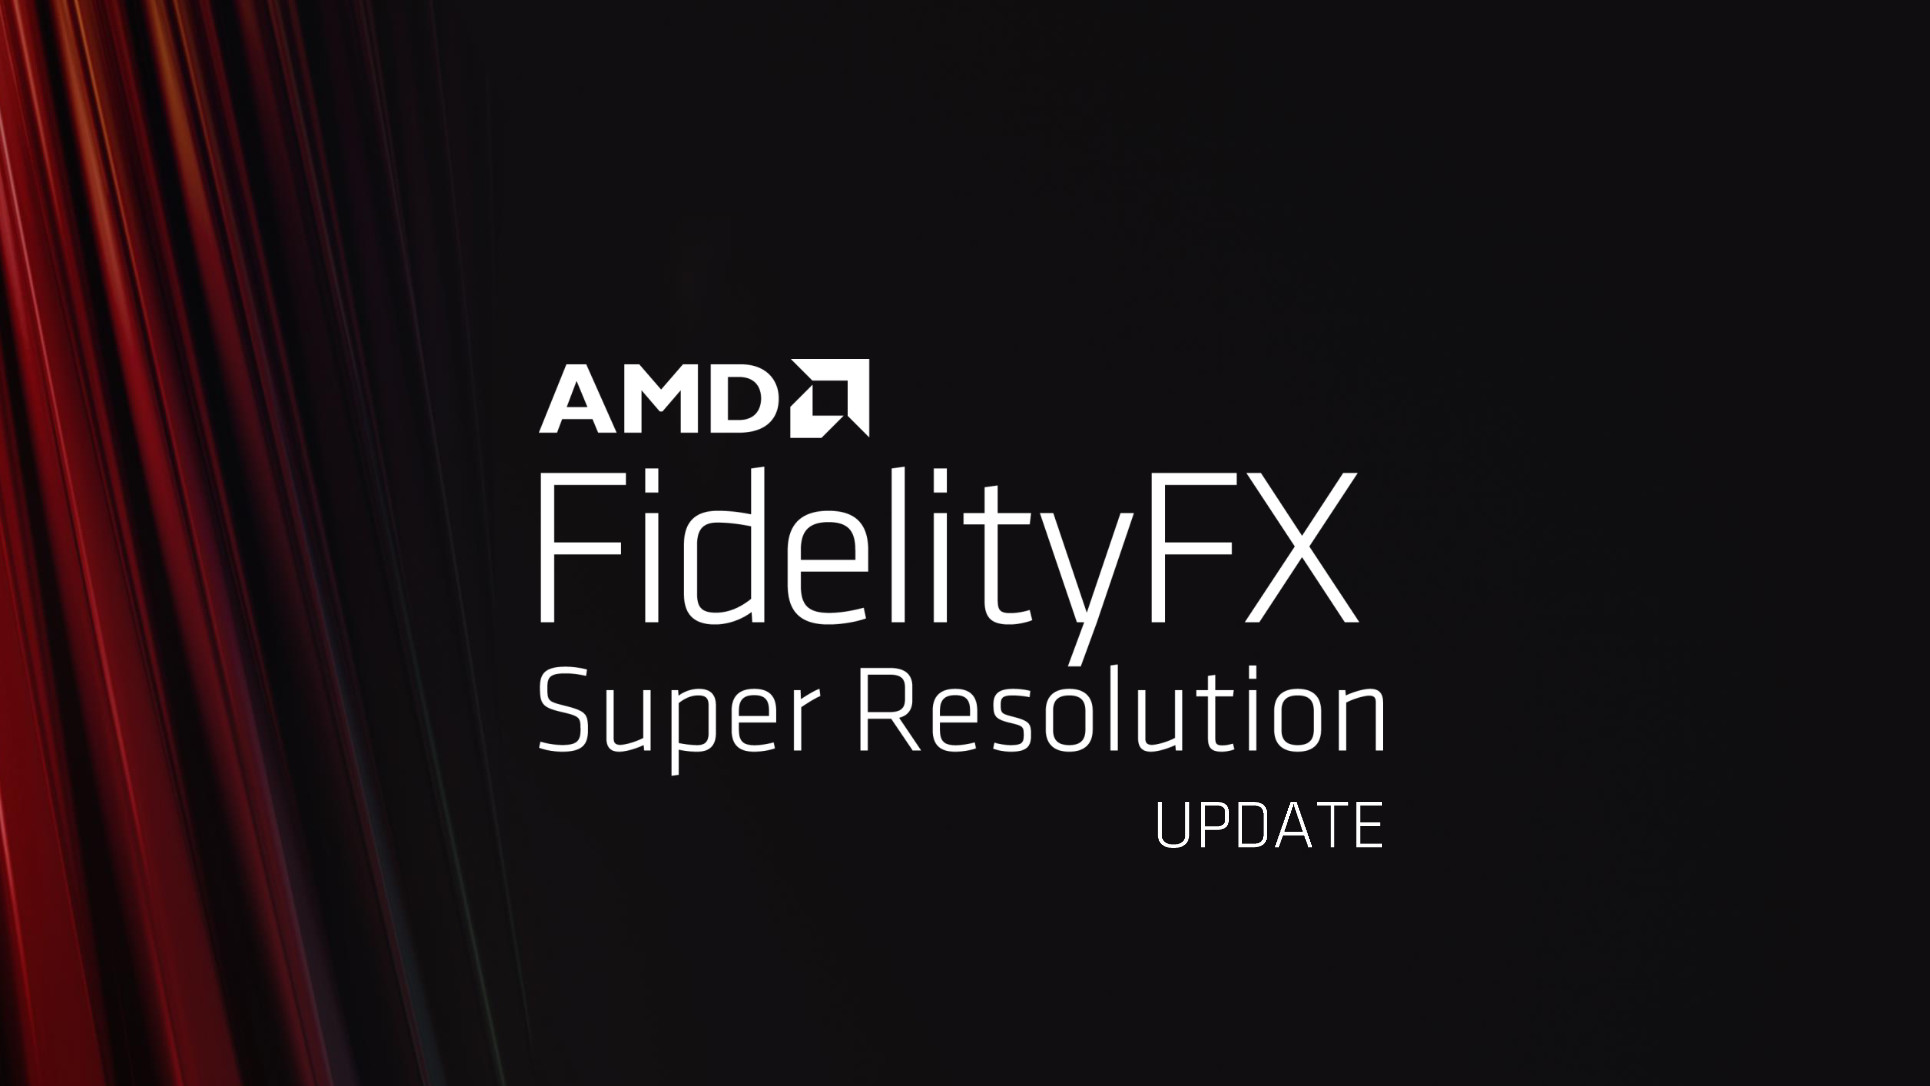 AMD FSR 2.0 launches in Q2 2022, uses temporal upscaling